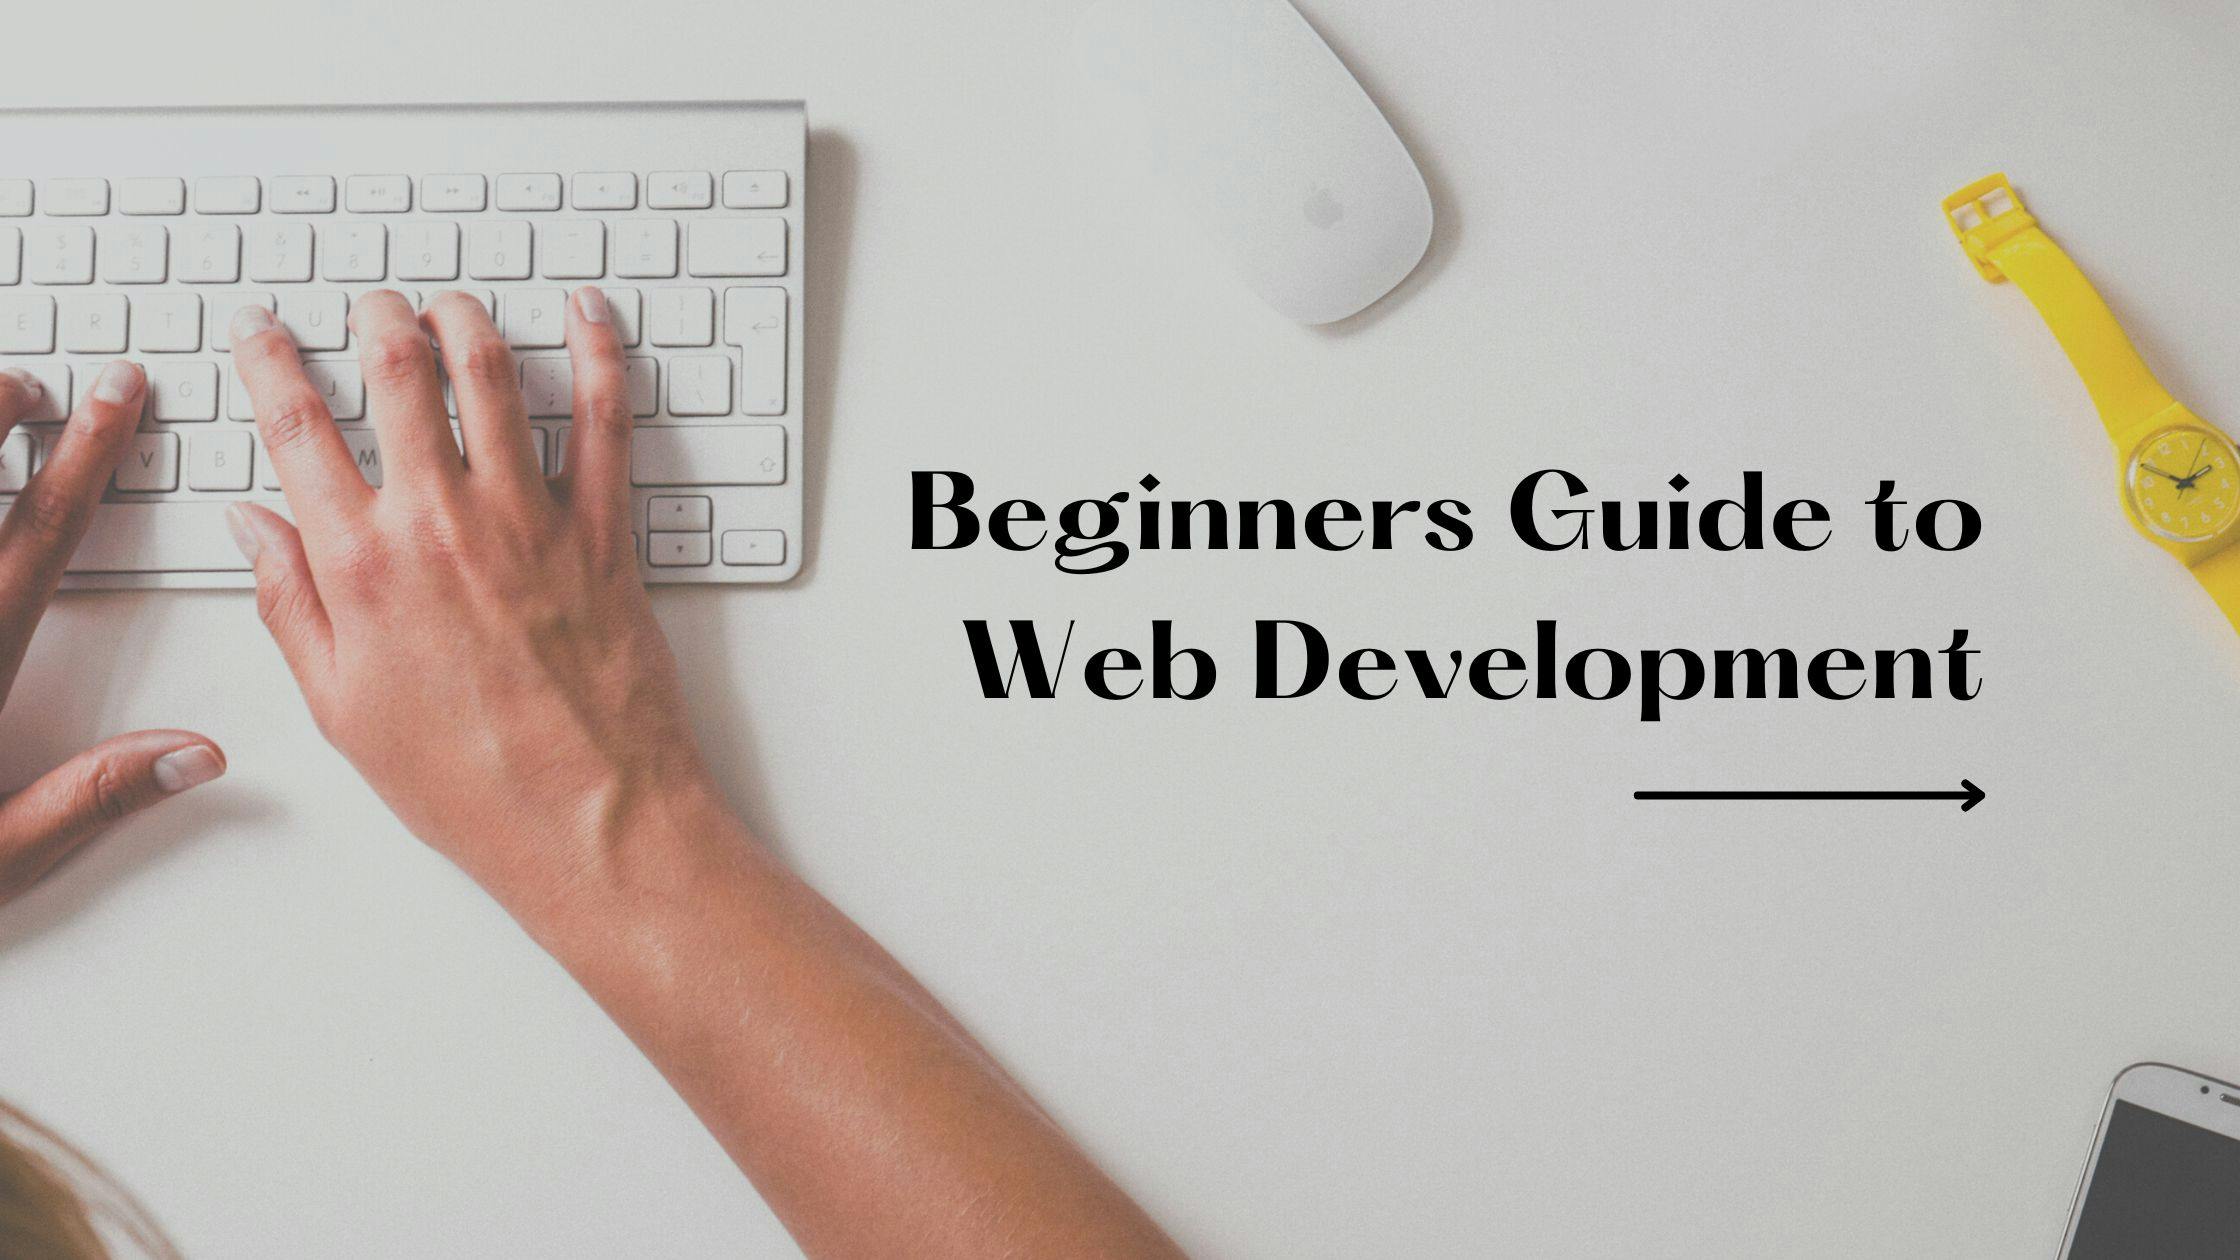 The Complete Guide to Web Development for Beginners in 2022